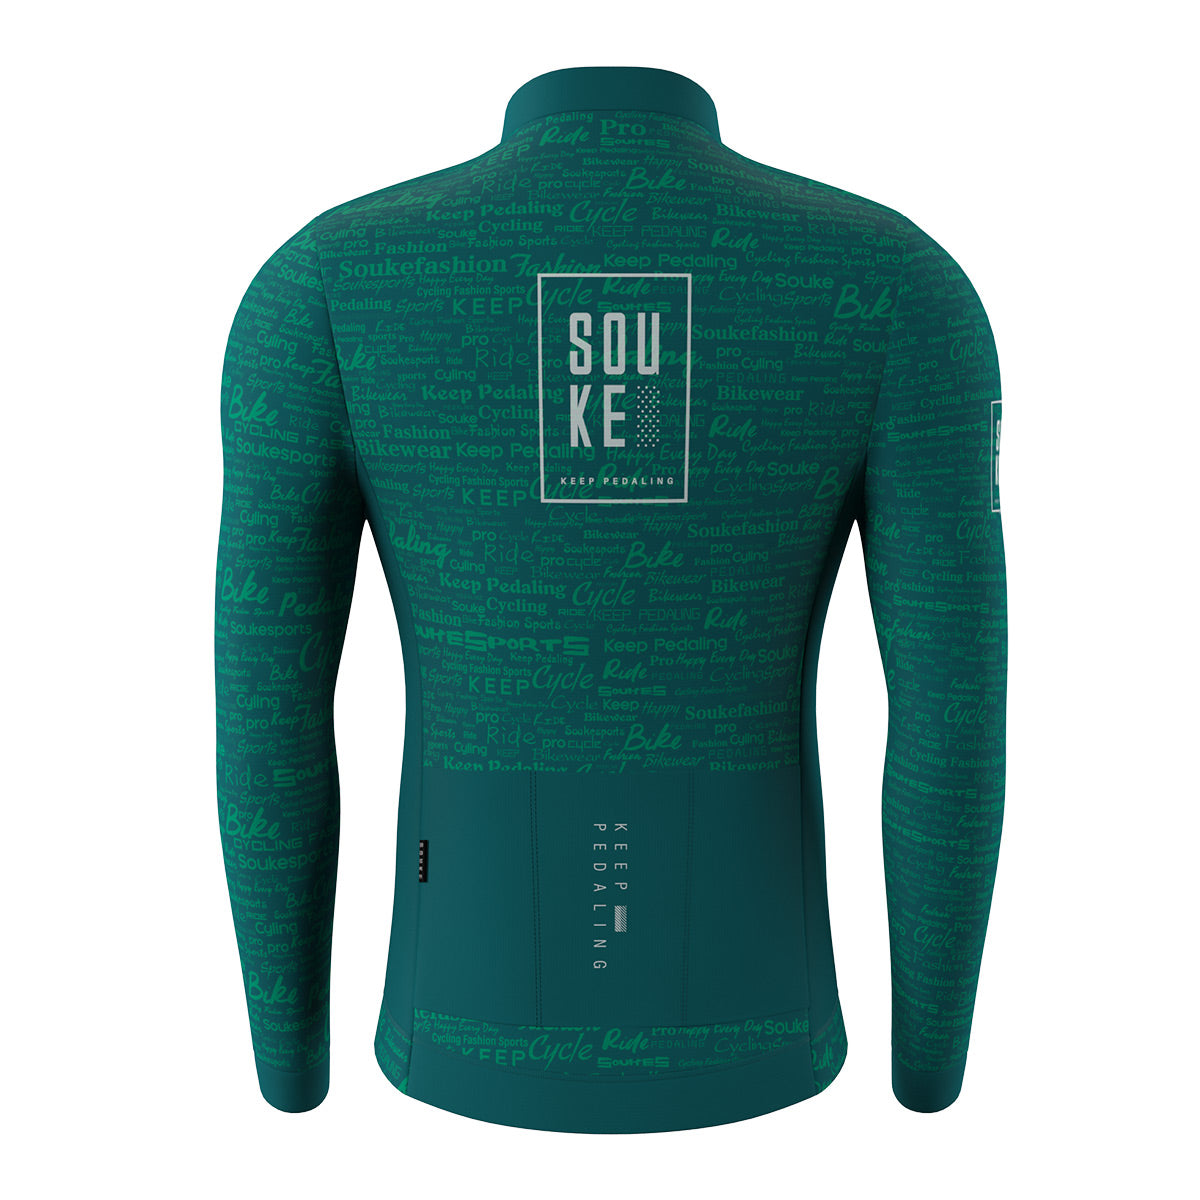 cycling long sleeve jersey, Graphene jersey,jersey for winter,green long jersey,jersey for winter and autumn, cold weather jersey (6793674129521)